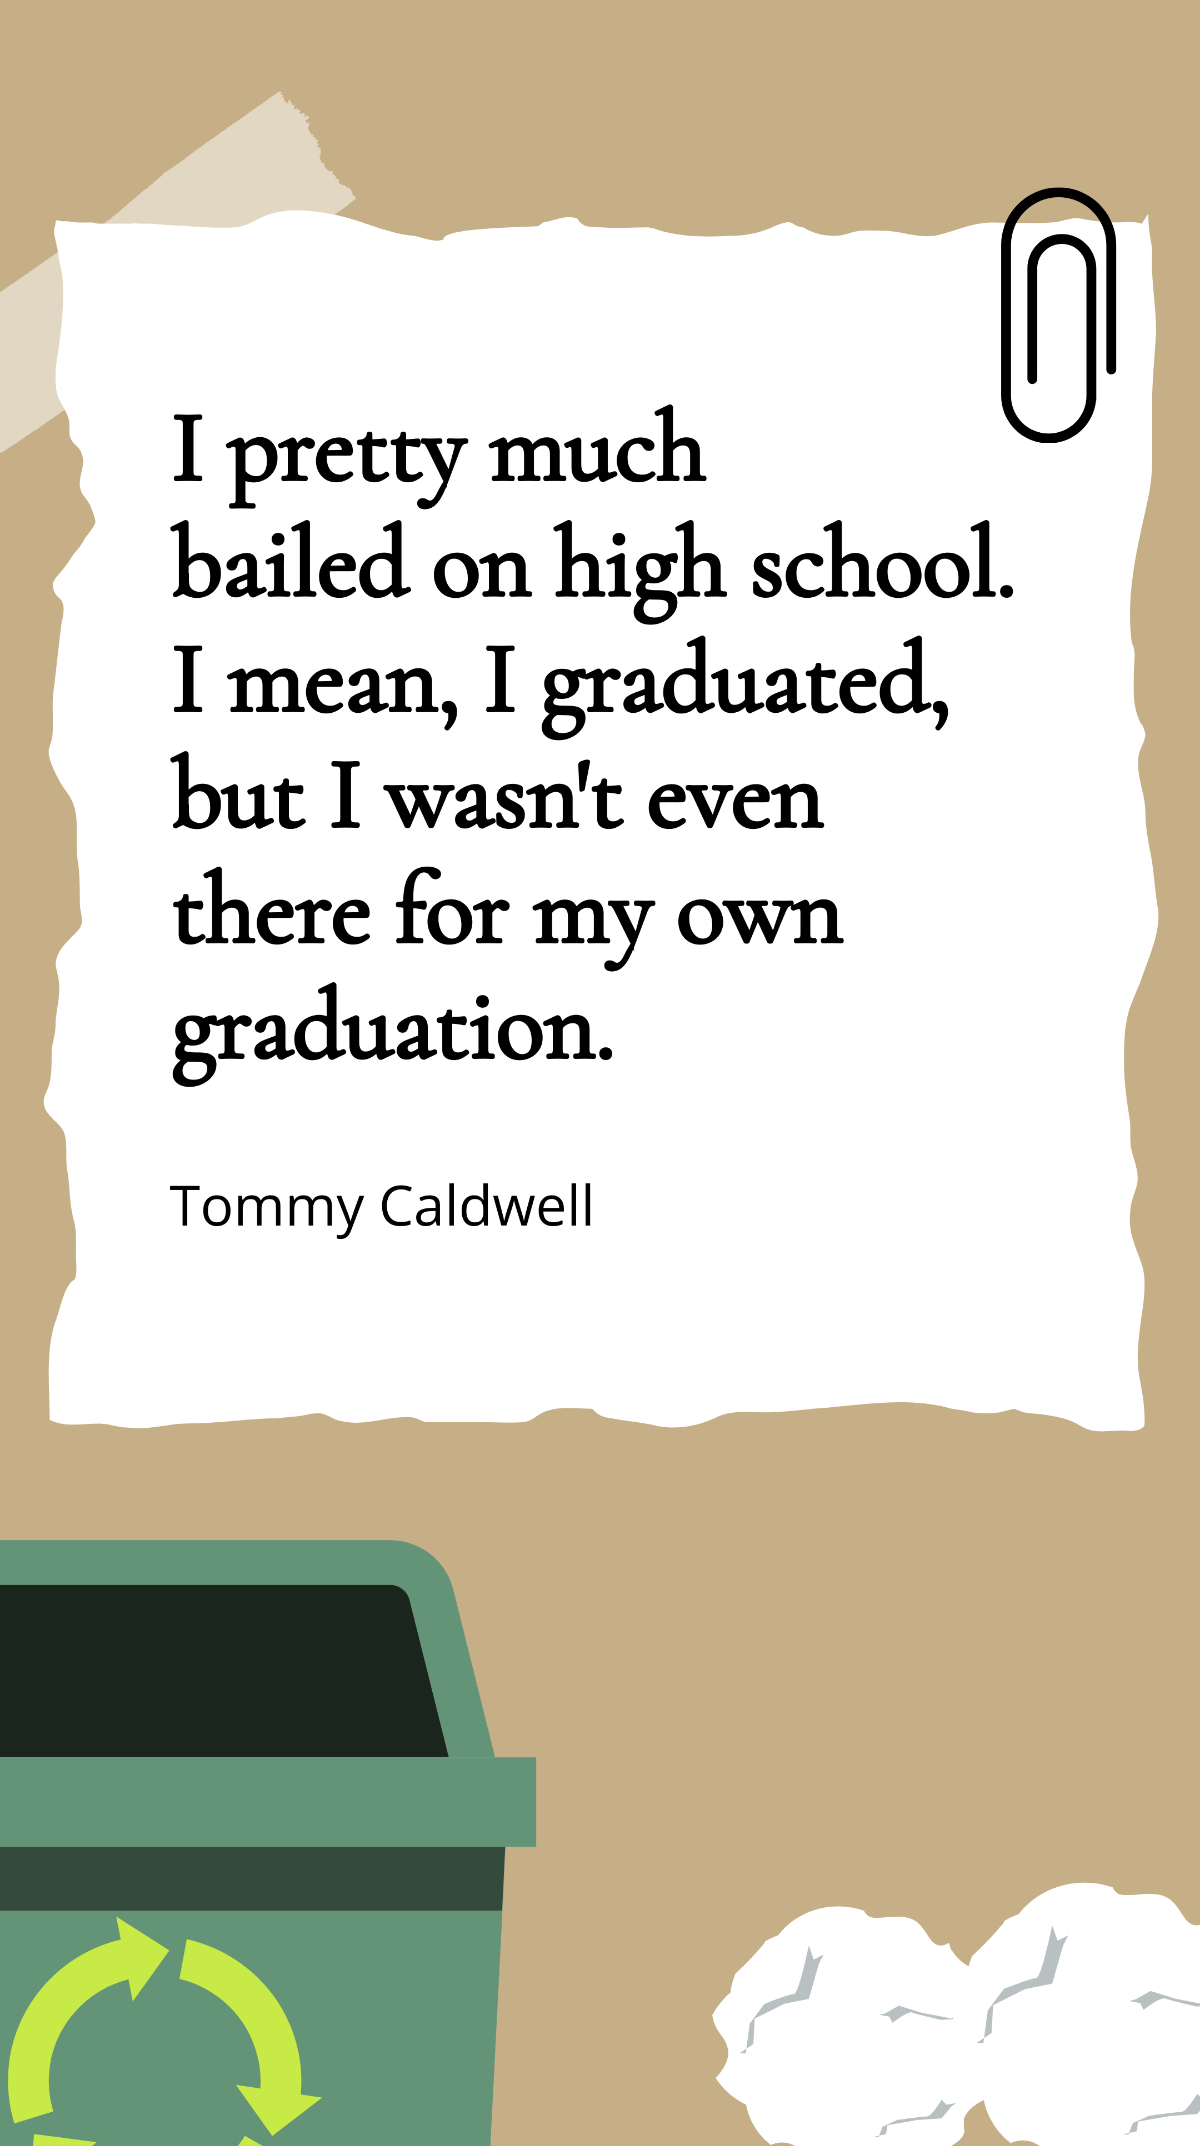 Tommy Caldwell - I pretty much bailed on high school. I mean, I graduated, but I wasn't even there for my own graduation. Template